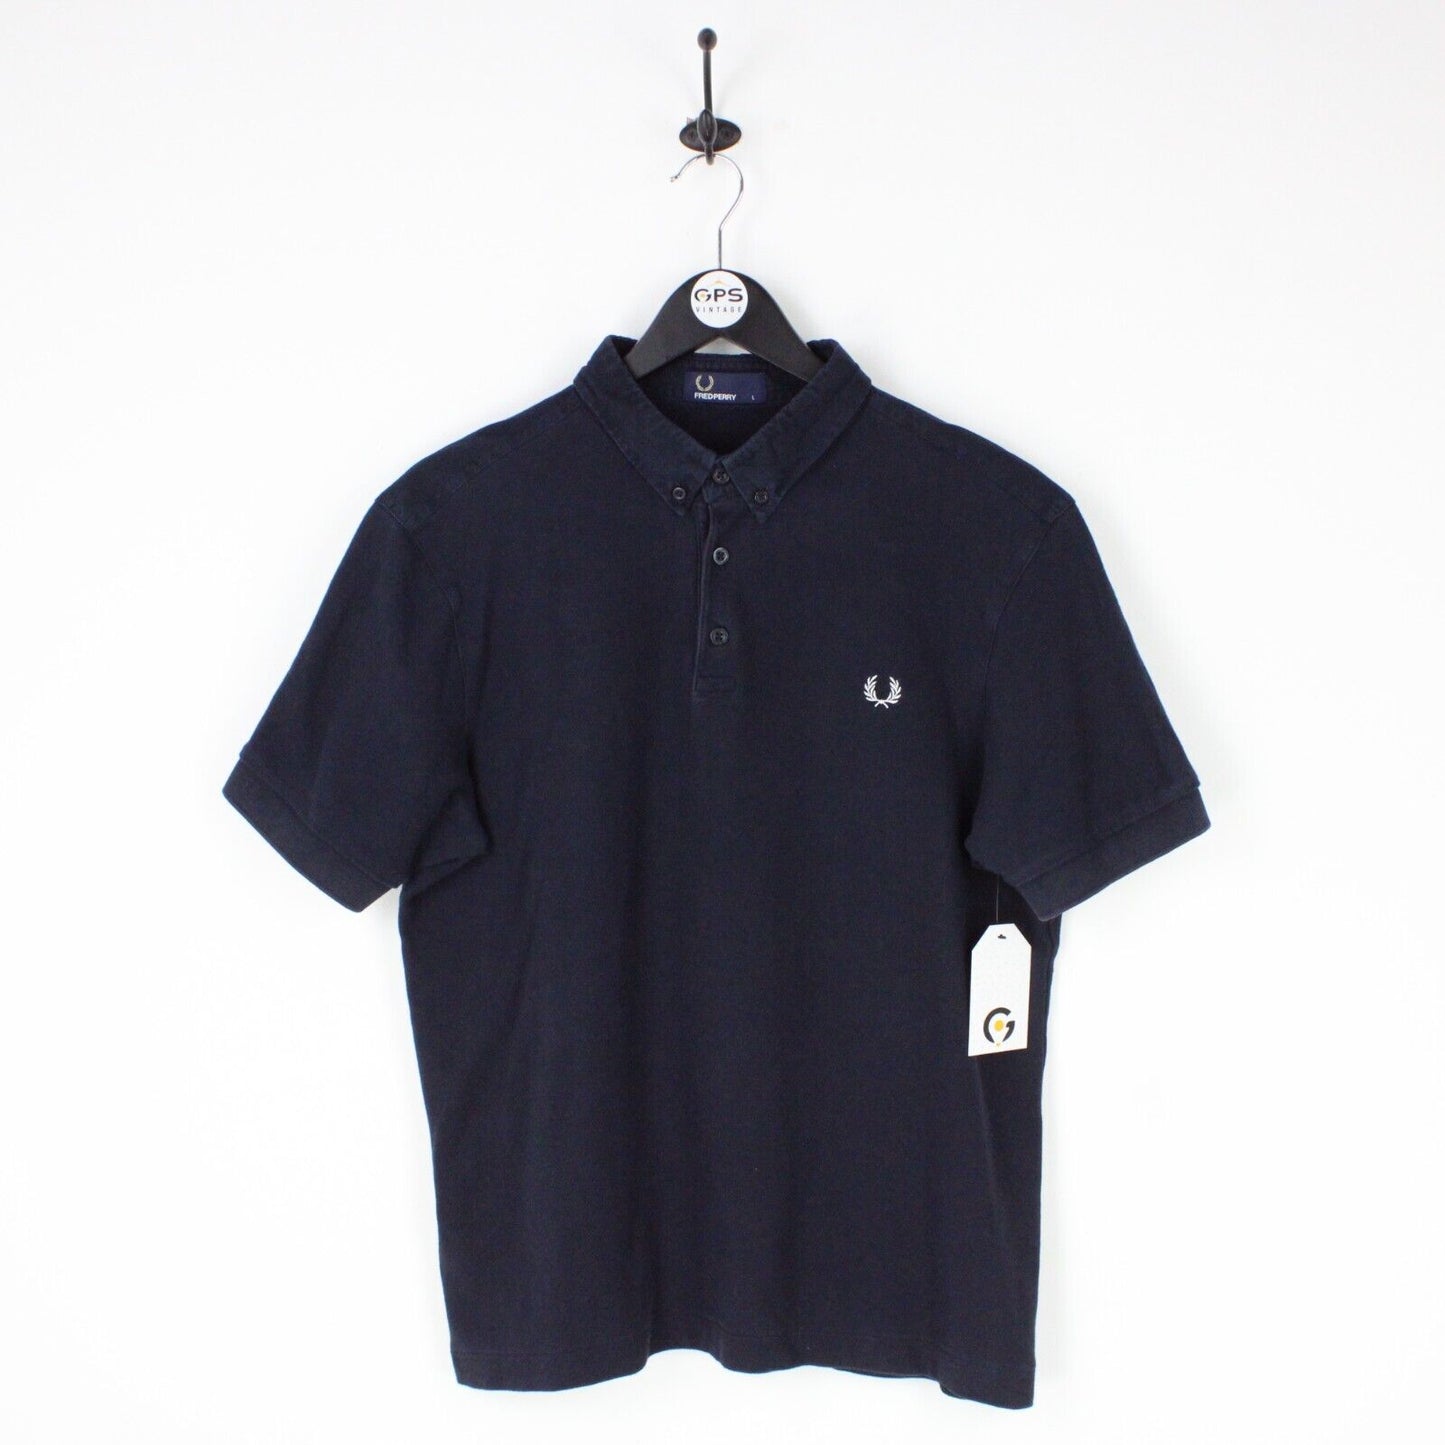 Mens FRED PERRY Polo Shirt Navy Blue | Large